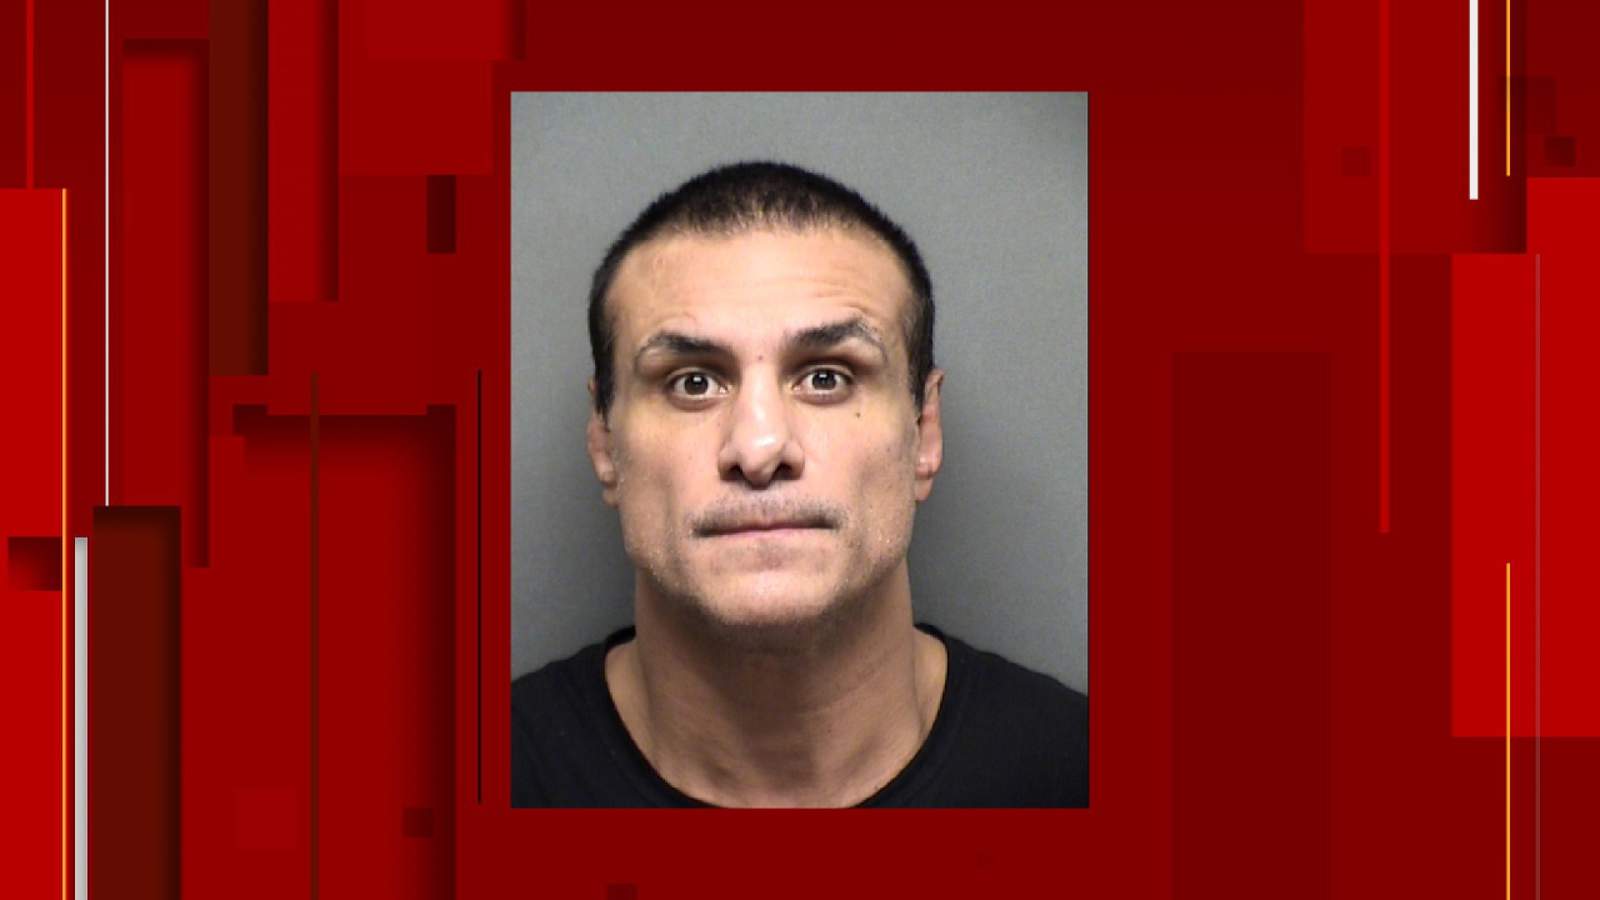 Ex-WWE wrestler charged after allegedly beating, sexually assaulting woman